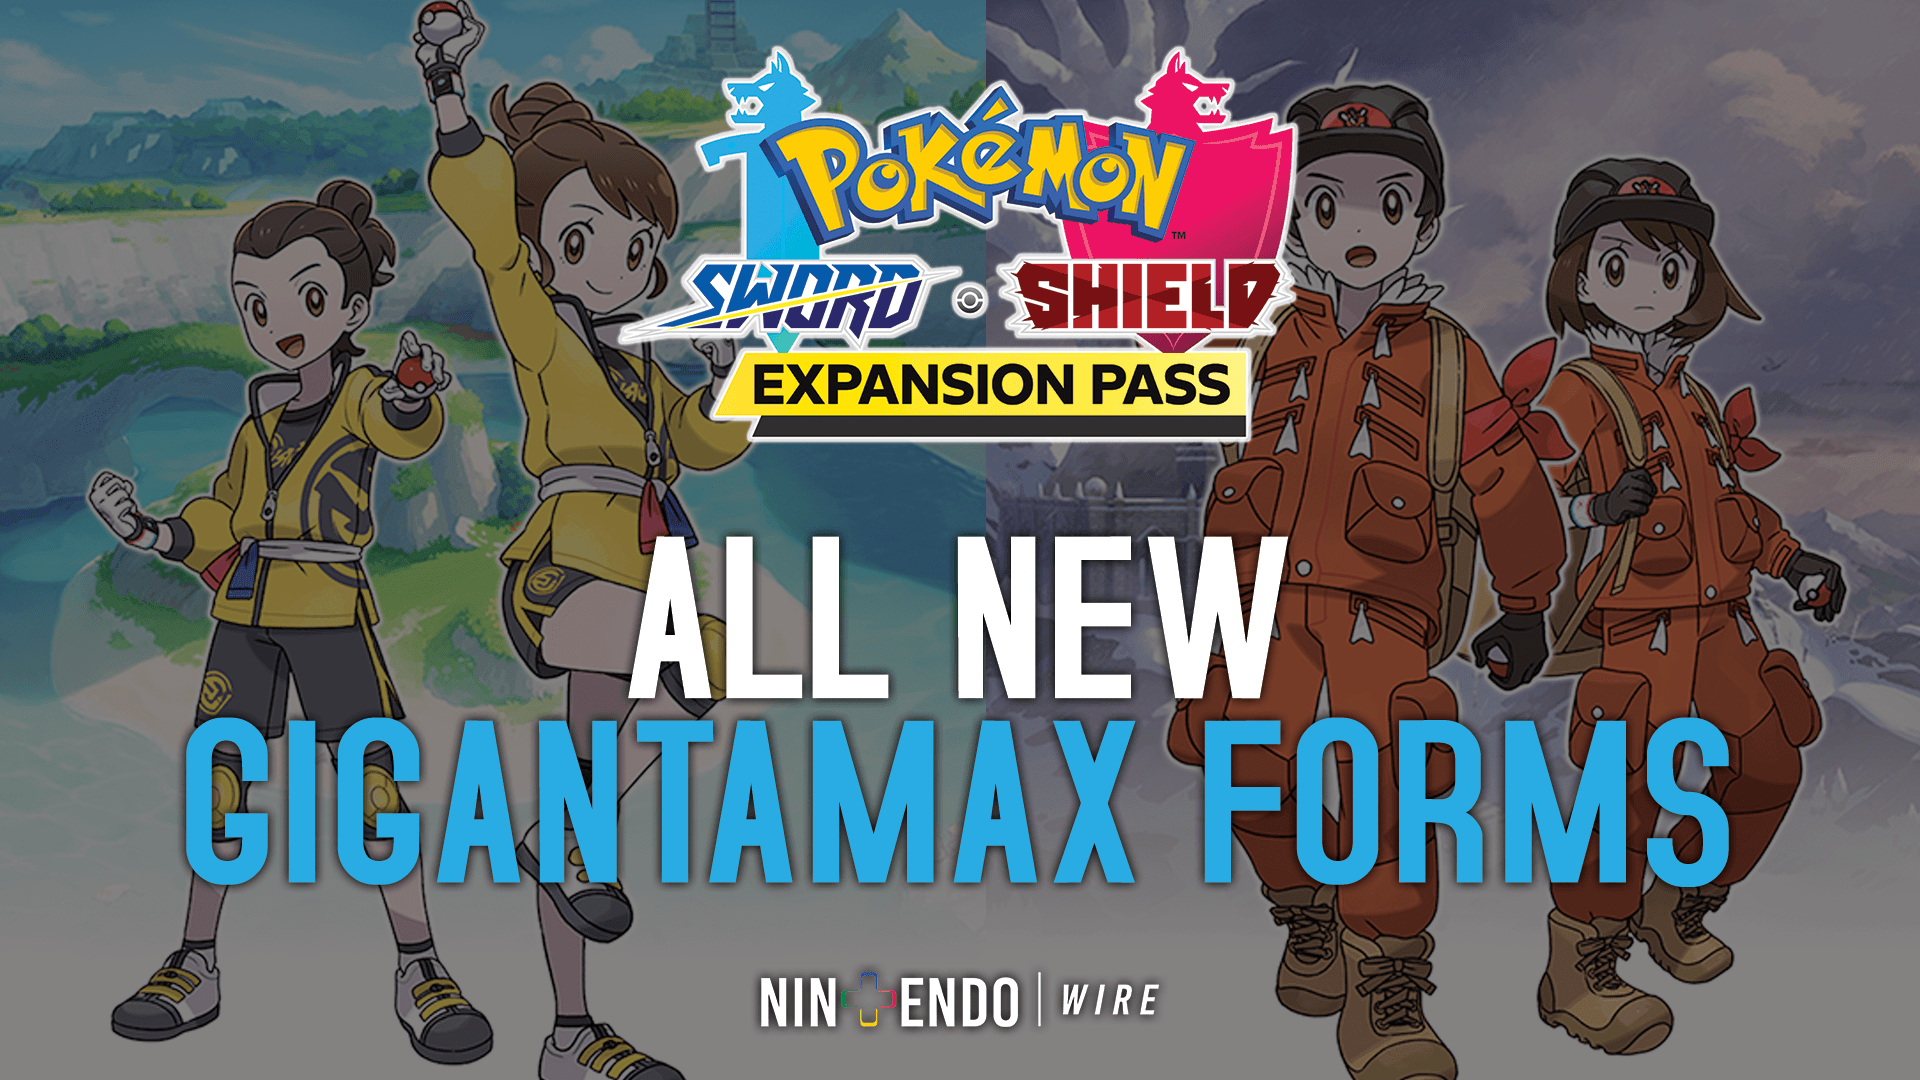 Guide New Gigantamax Forms In Pokemon Sword Shield Expansion Pass